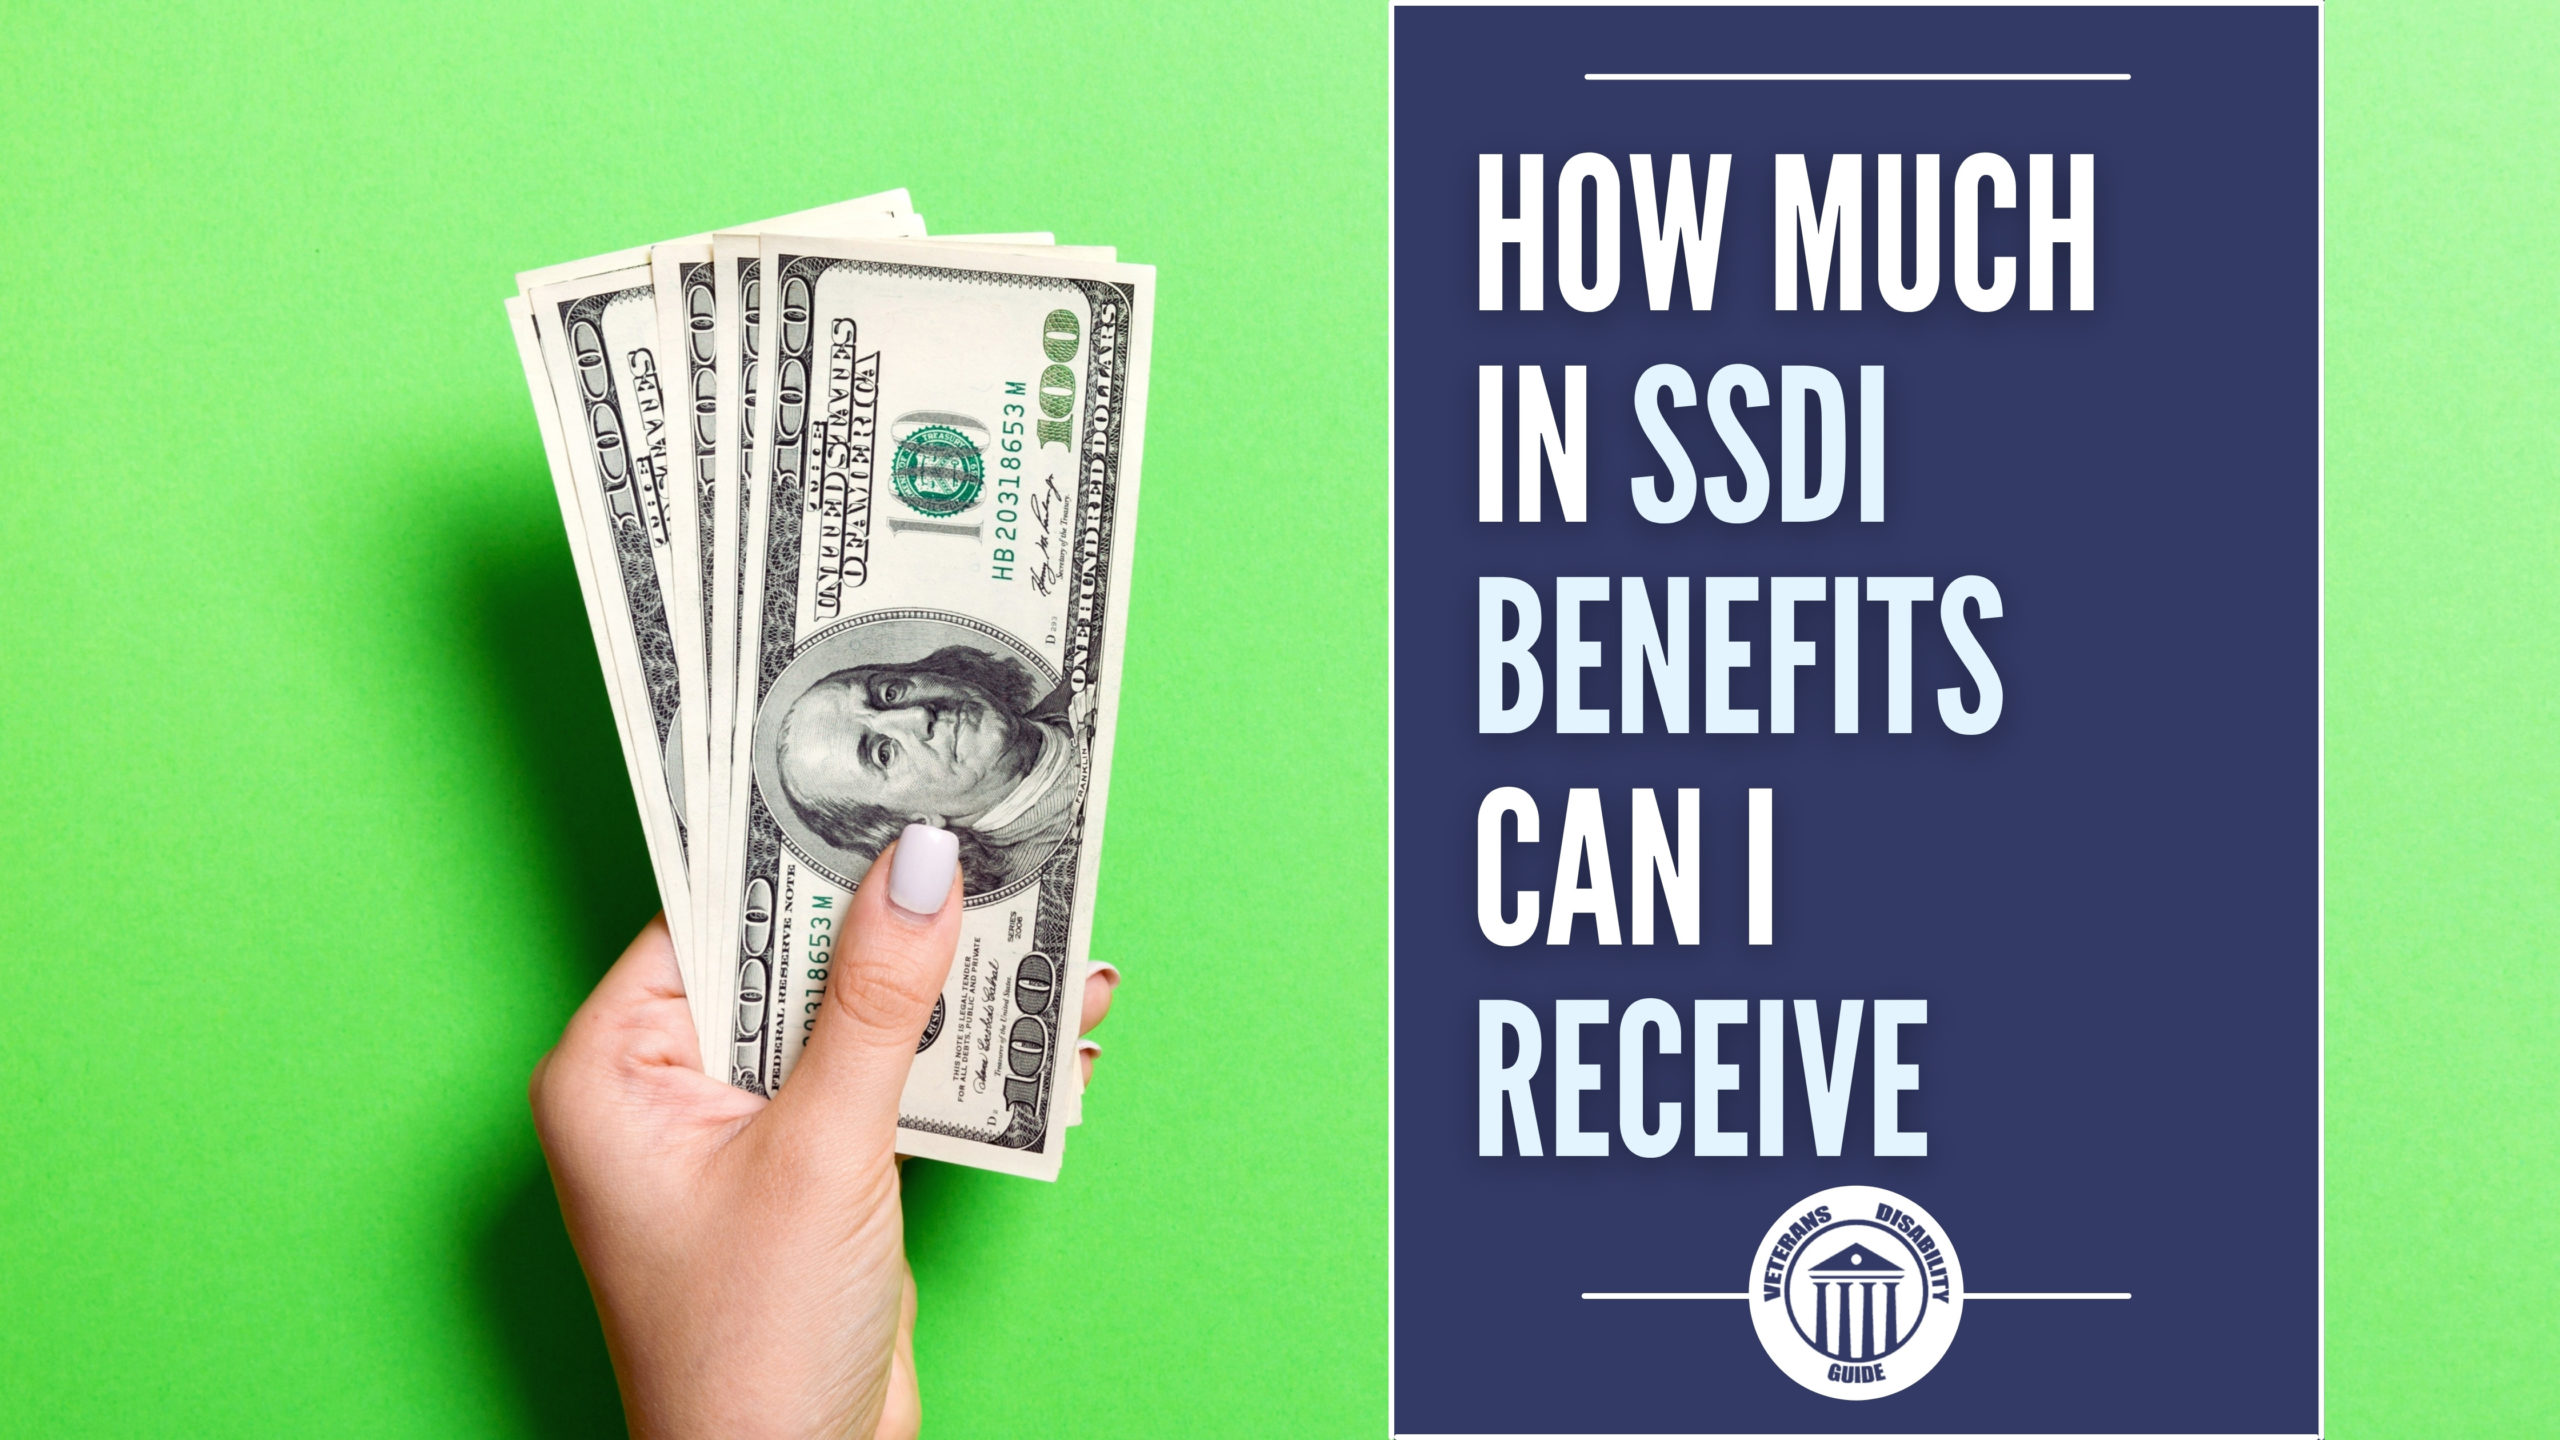 how much in ssdi benefits can I receive blog header image